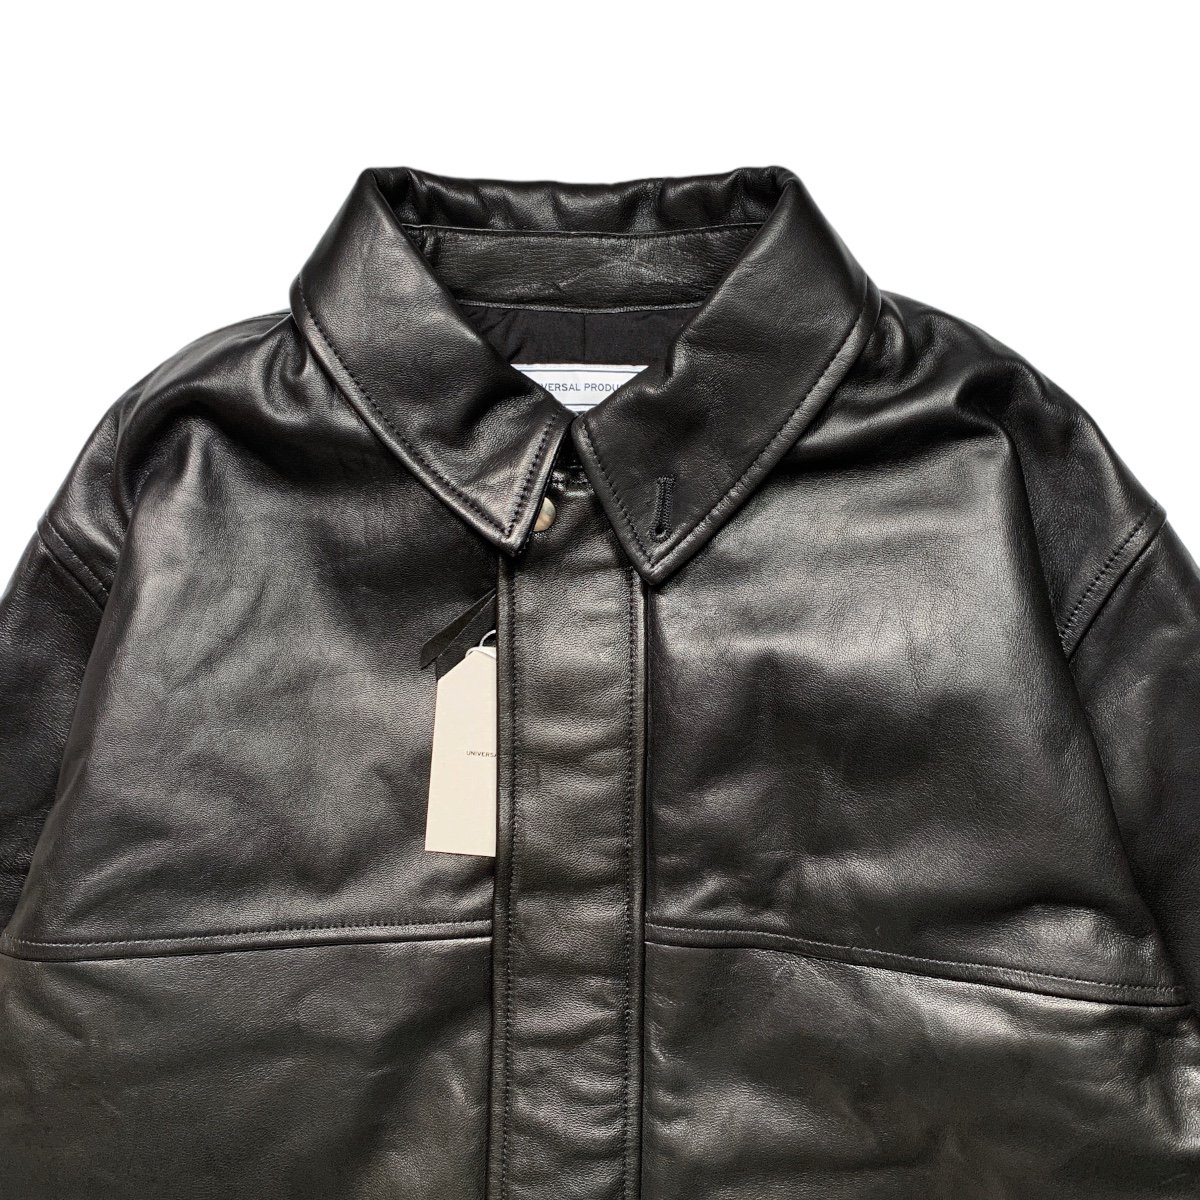 UNIVERSAL PRODUCTS《ユニバーサルプロダクツ》SHEEP LEATHER CARCOAT ...